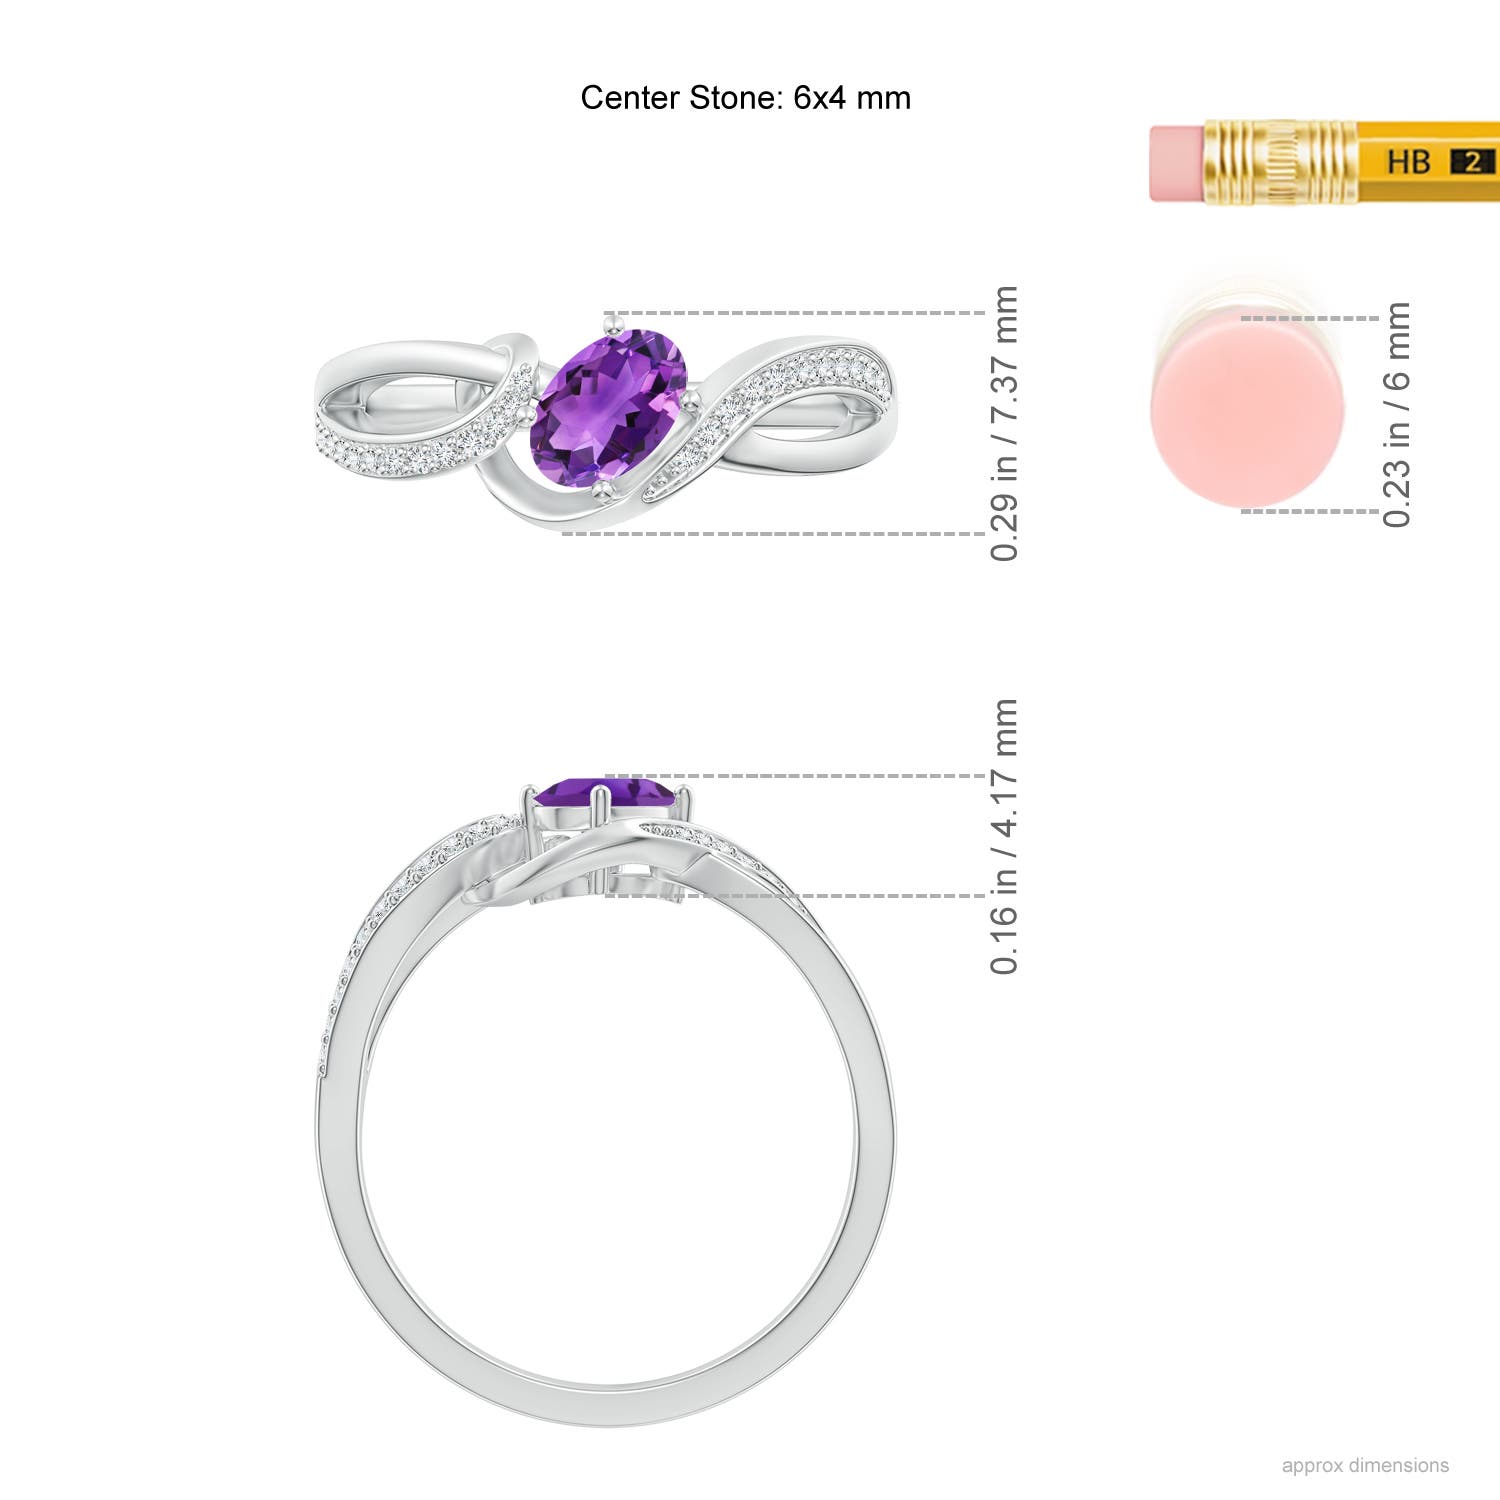 AAA - Amethyst / 0.51 CT / 14 KT White Gold